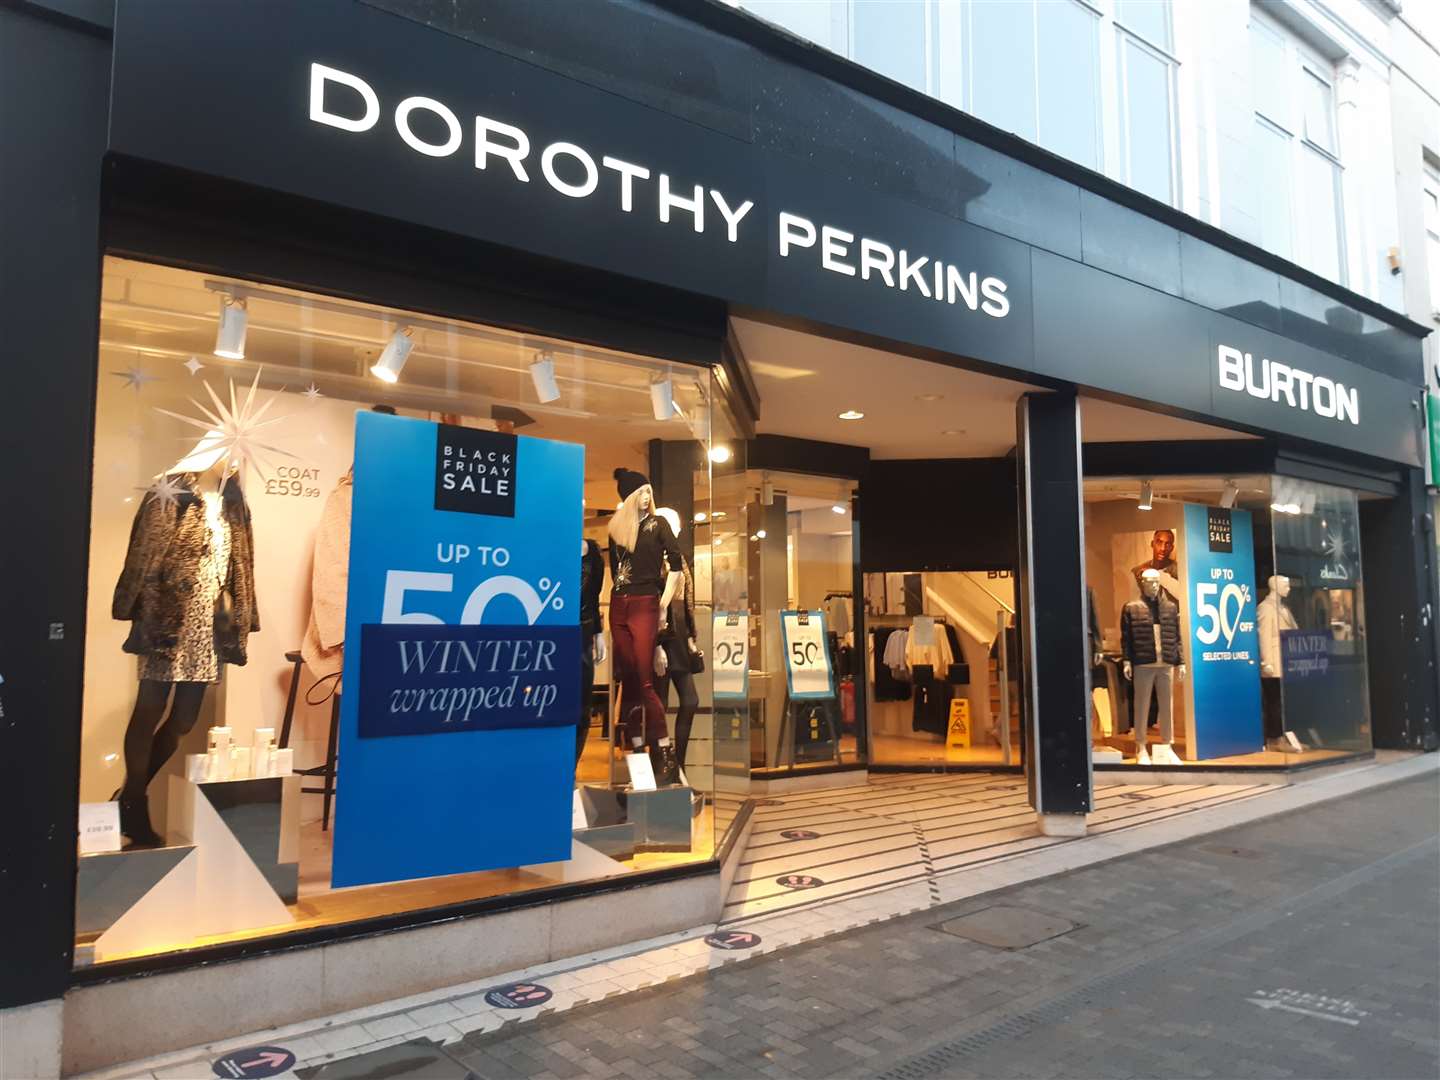 Arcadia Group stores Burton and Dorothy Perkins have been sold by adminstrators